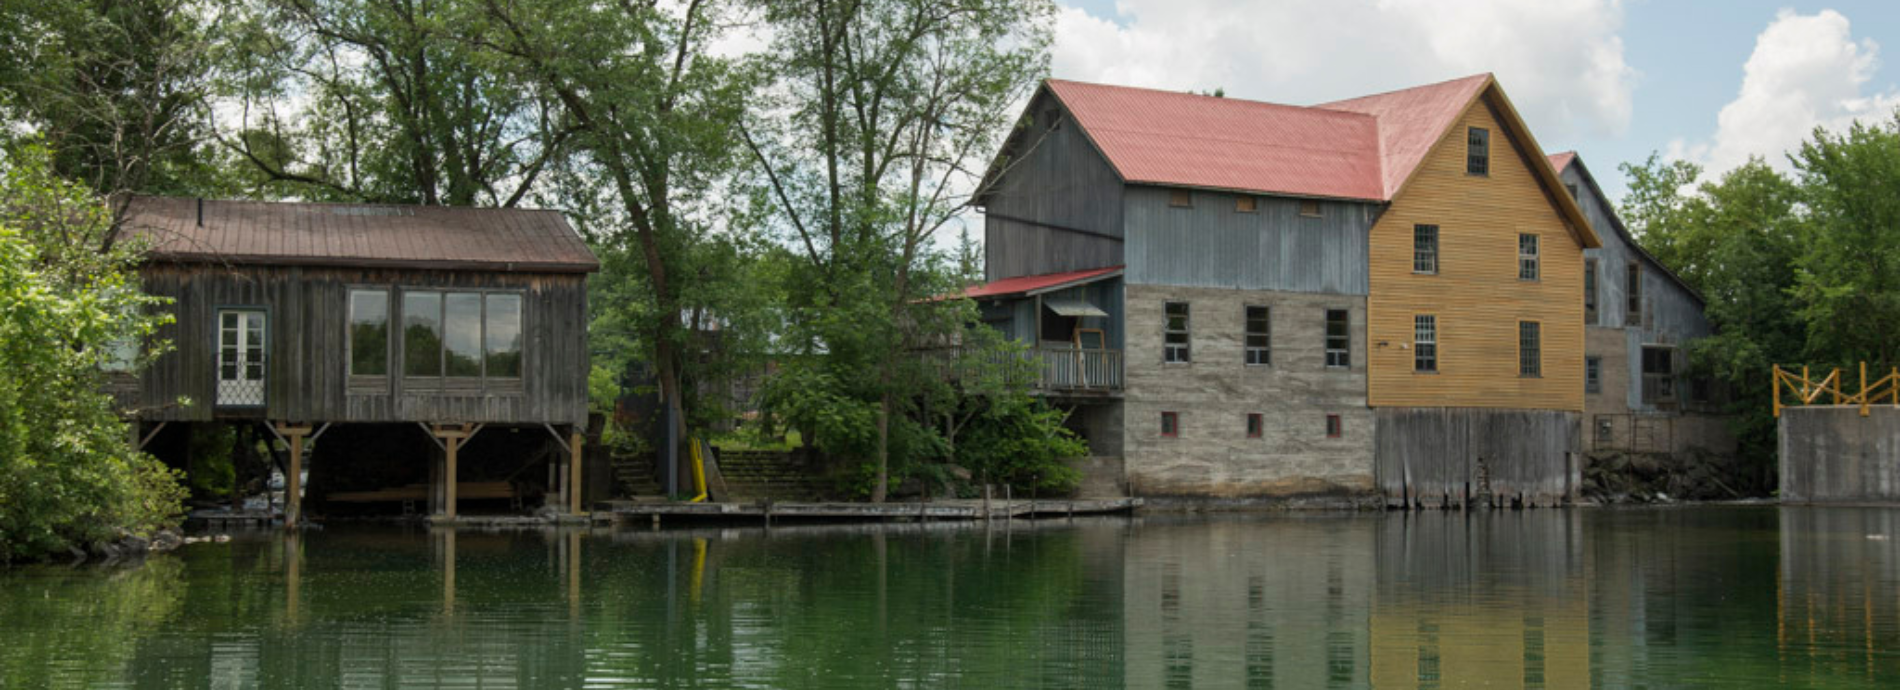 waterside view of the Washago Mill